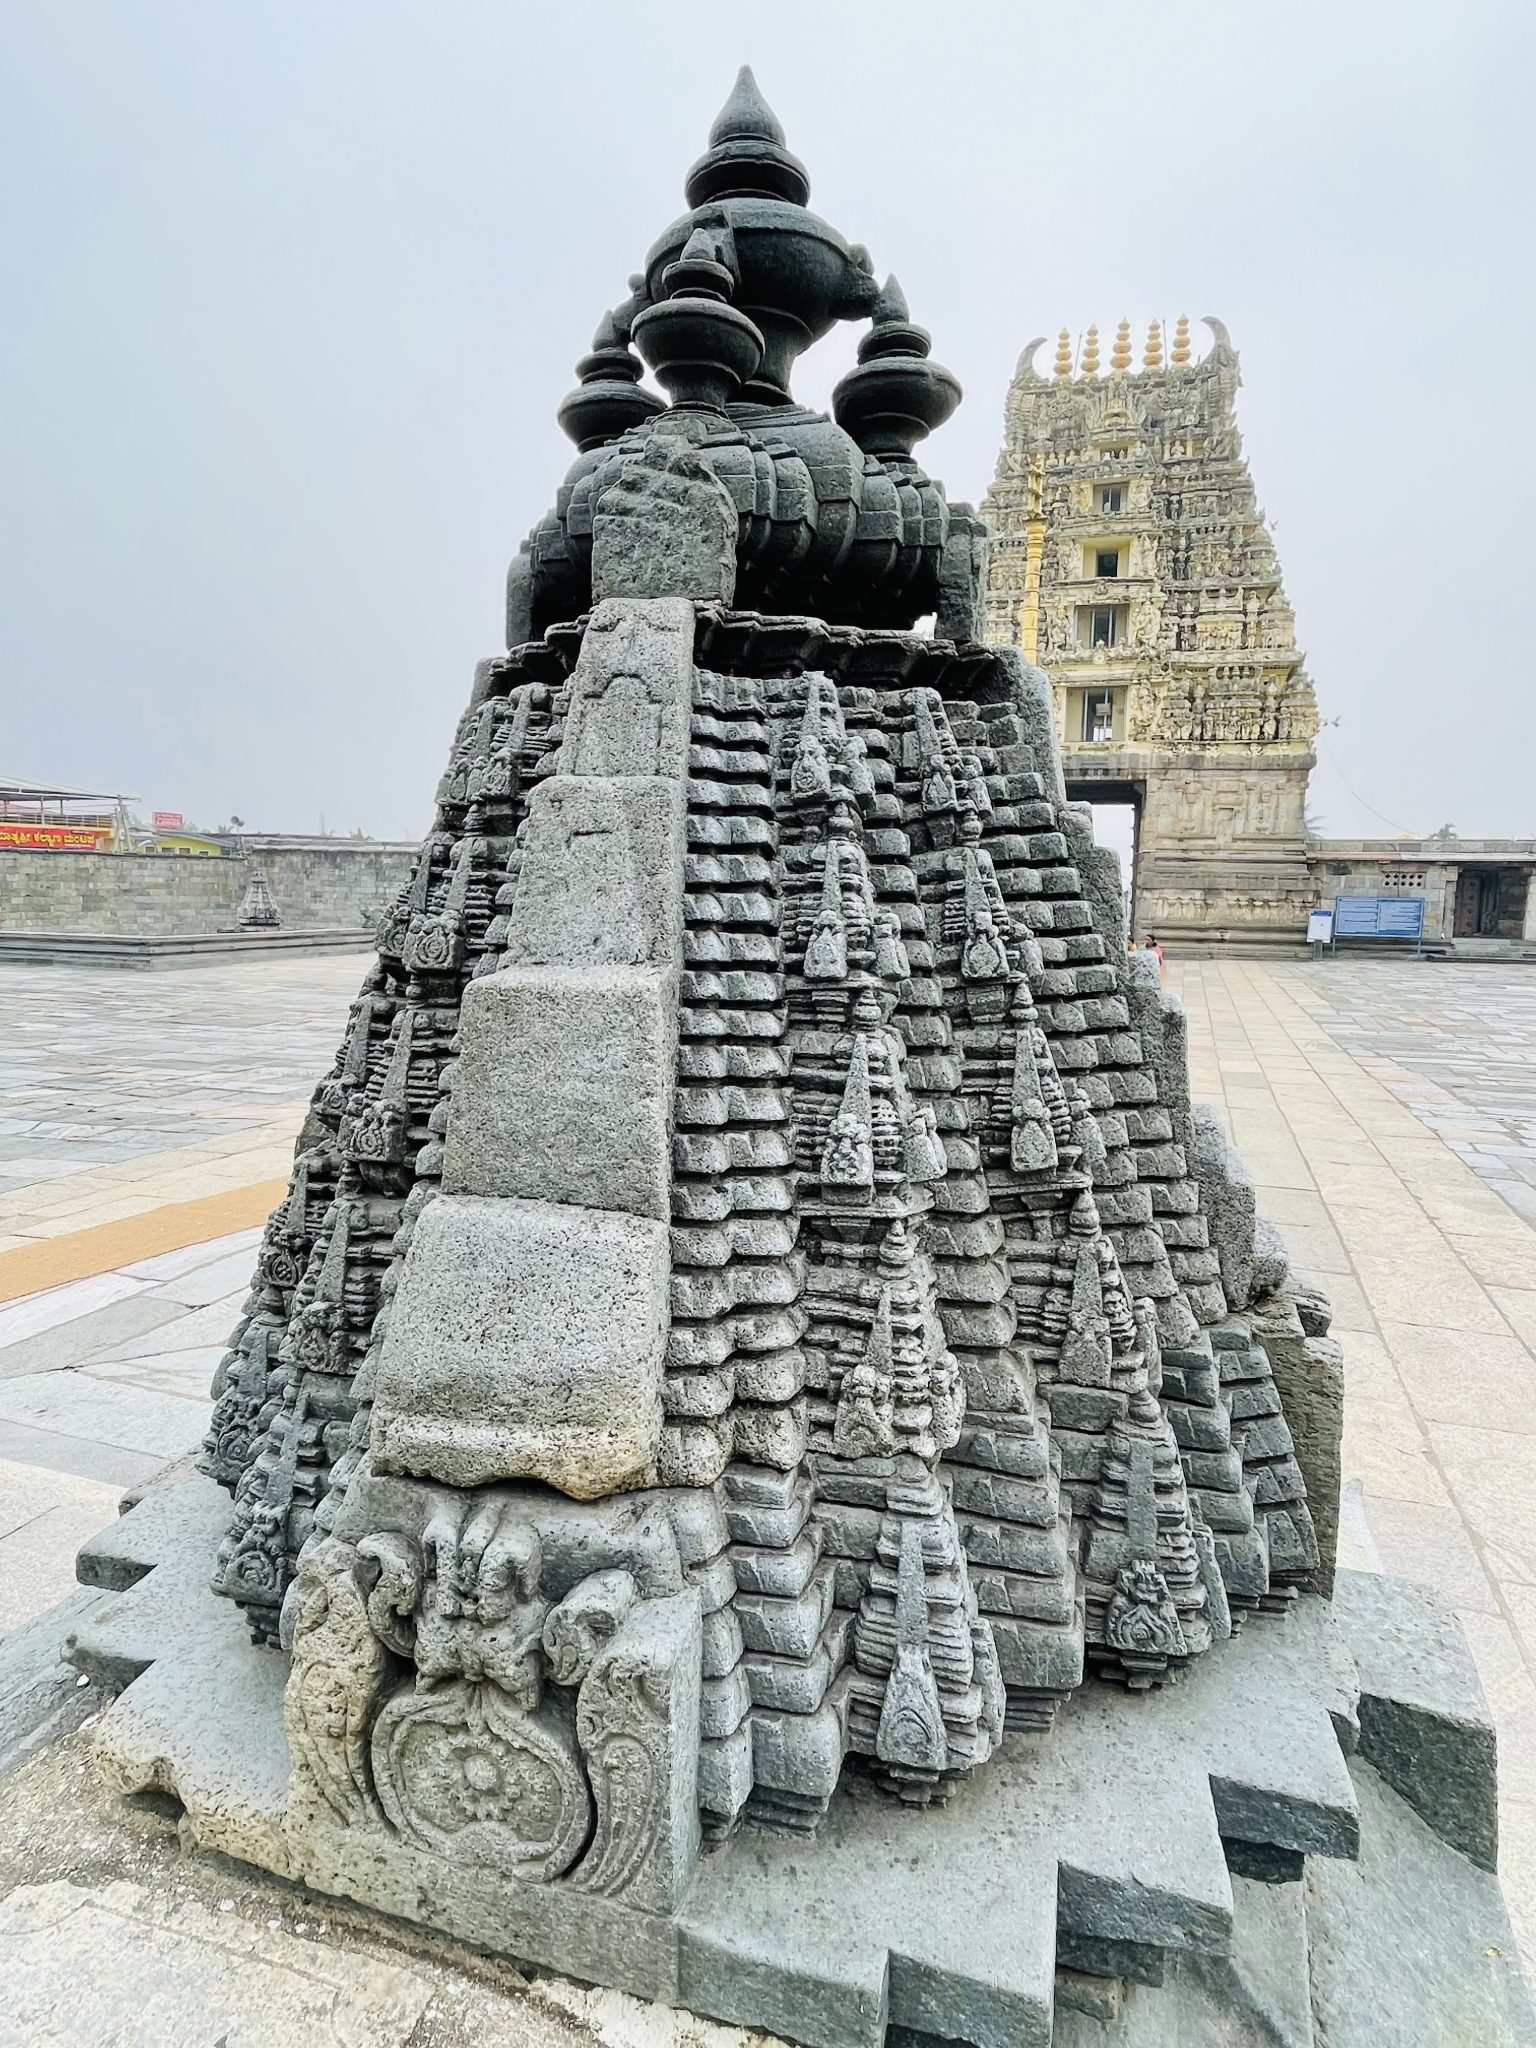 A miniature tower and main entrance tower(Gopuram) of Shri Chennakeshava Swami Temple. Belur, Karnataka, India. Smaller one is 800 years old and main tower is around 300 years old.